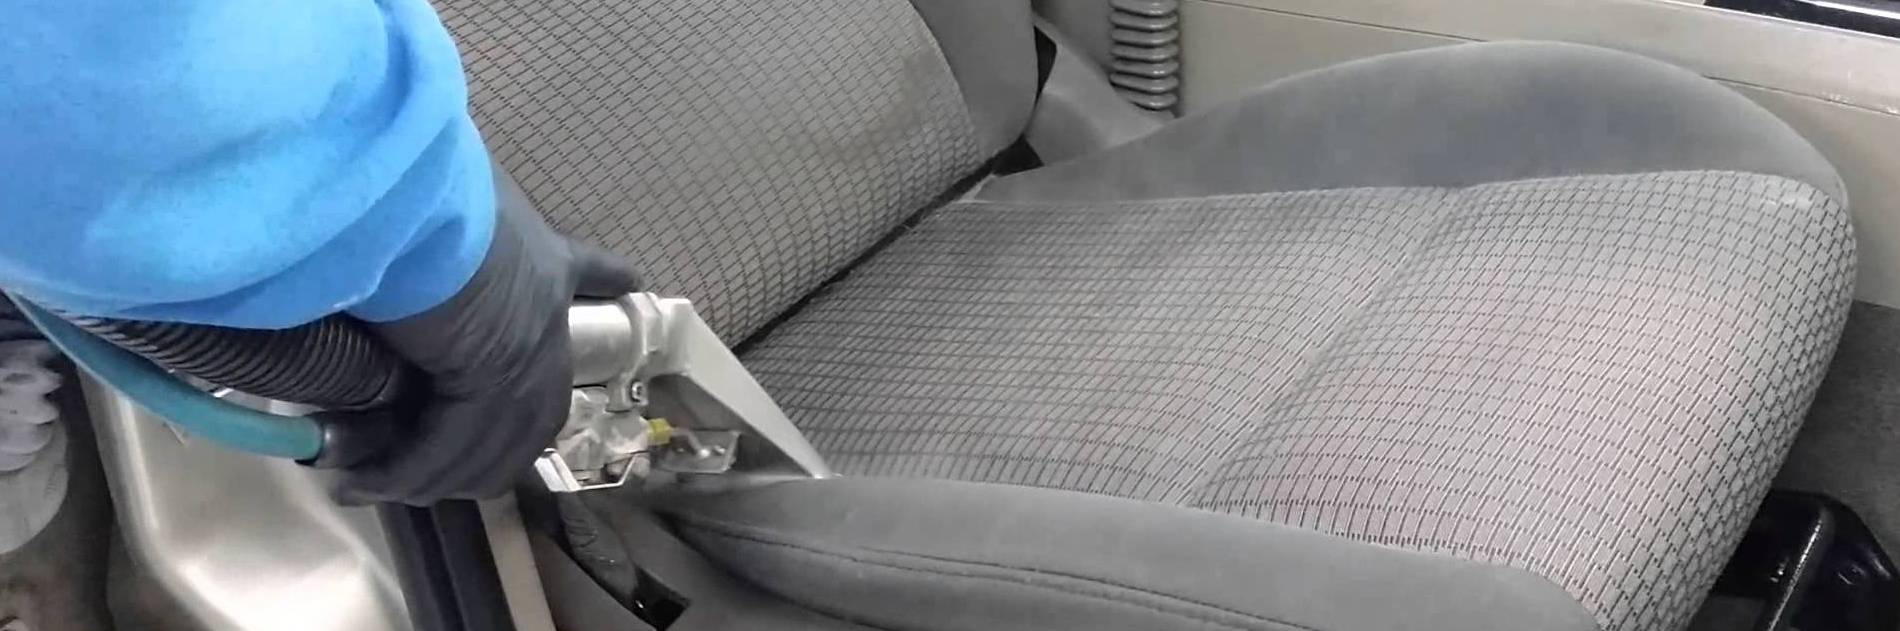 Car Interior Cleaning Adelaide Car Seat Steam Cleaning